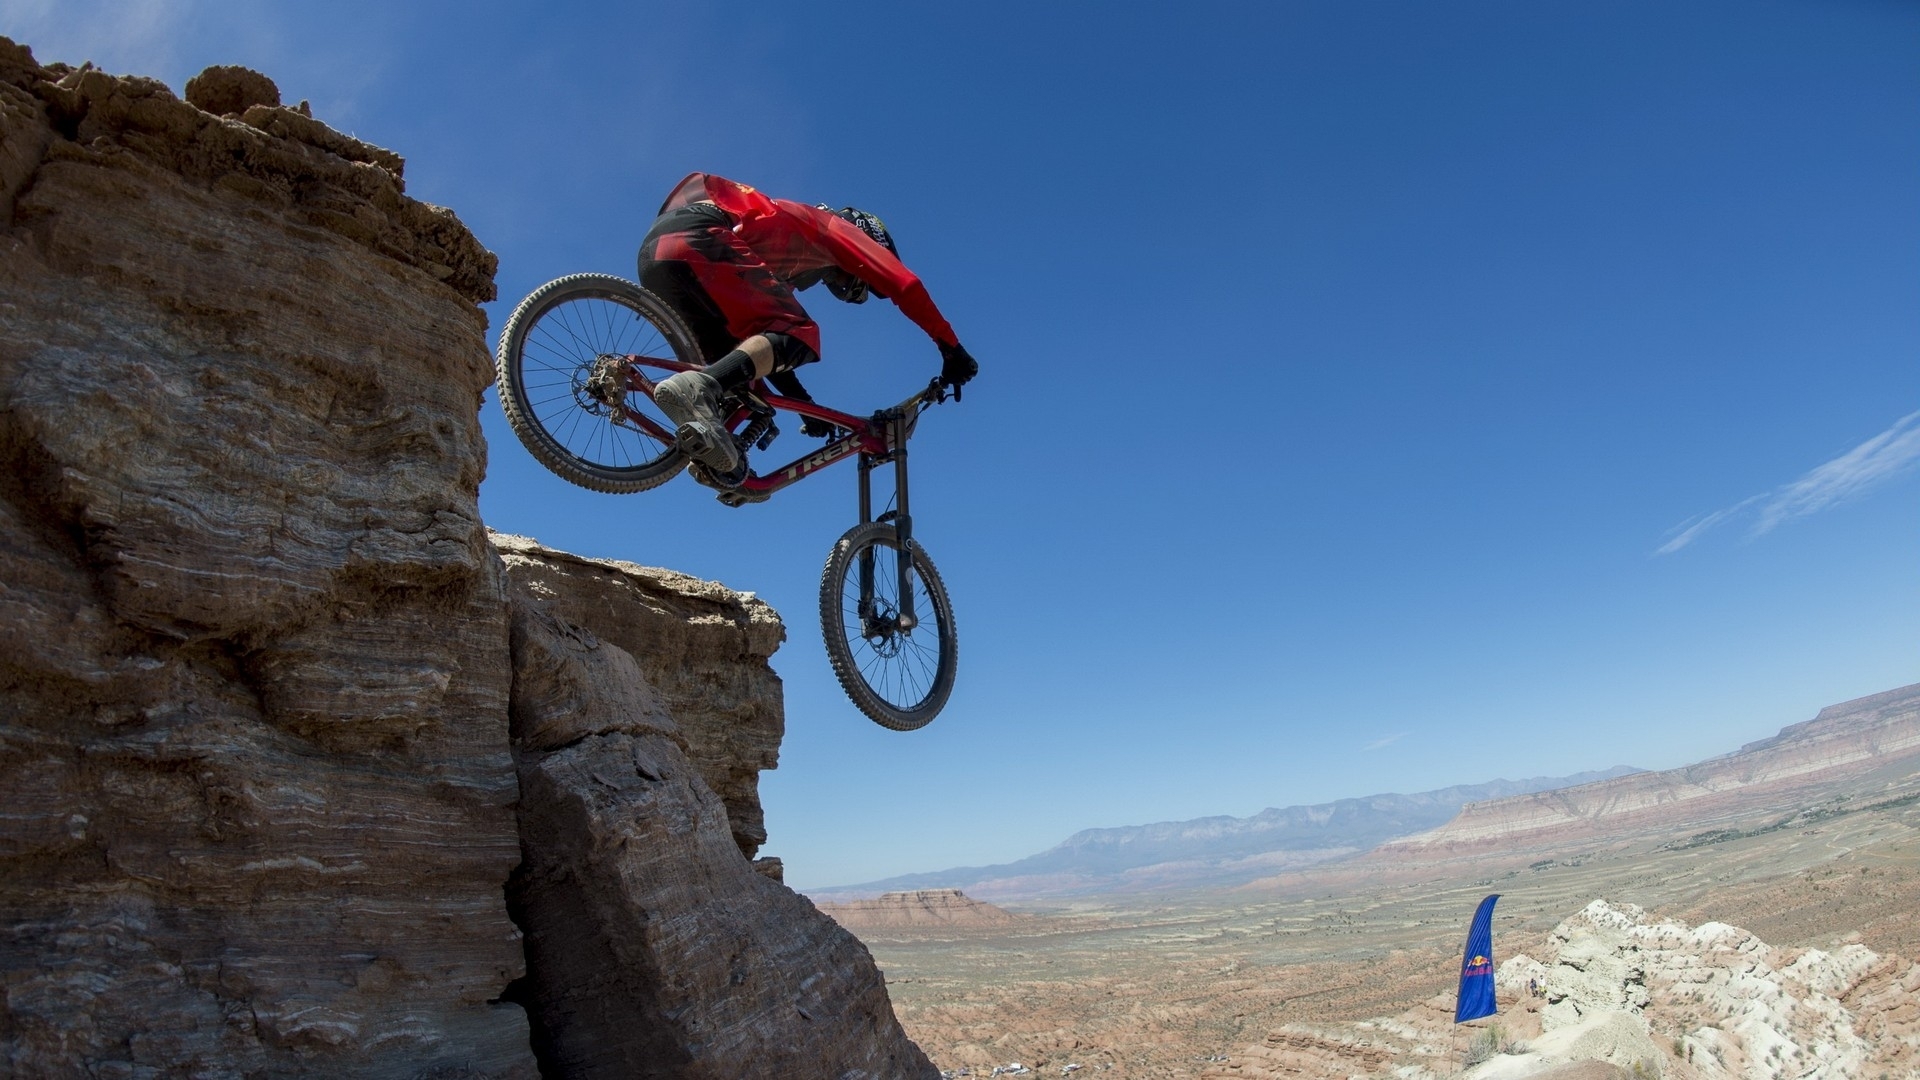 bicycles, Sports, Extreme, Red, Bull, Rampage, Mountain, Cliff, Landscapes, Nature, Racing, Crazy Wallpaper